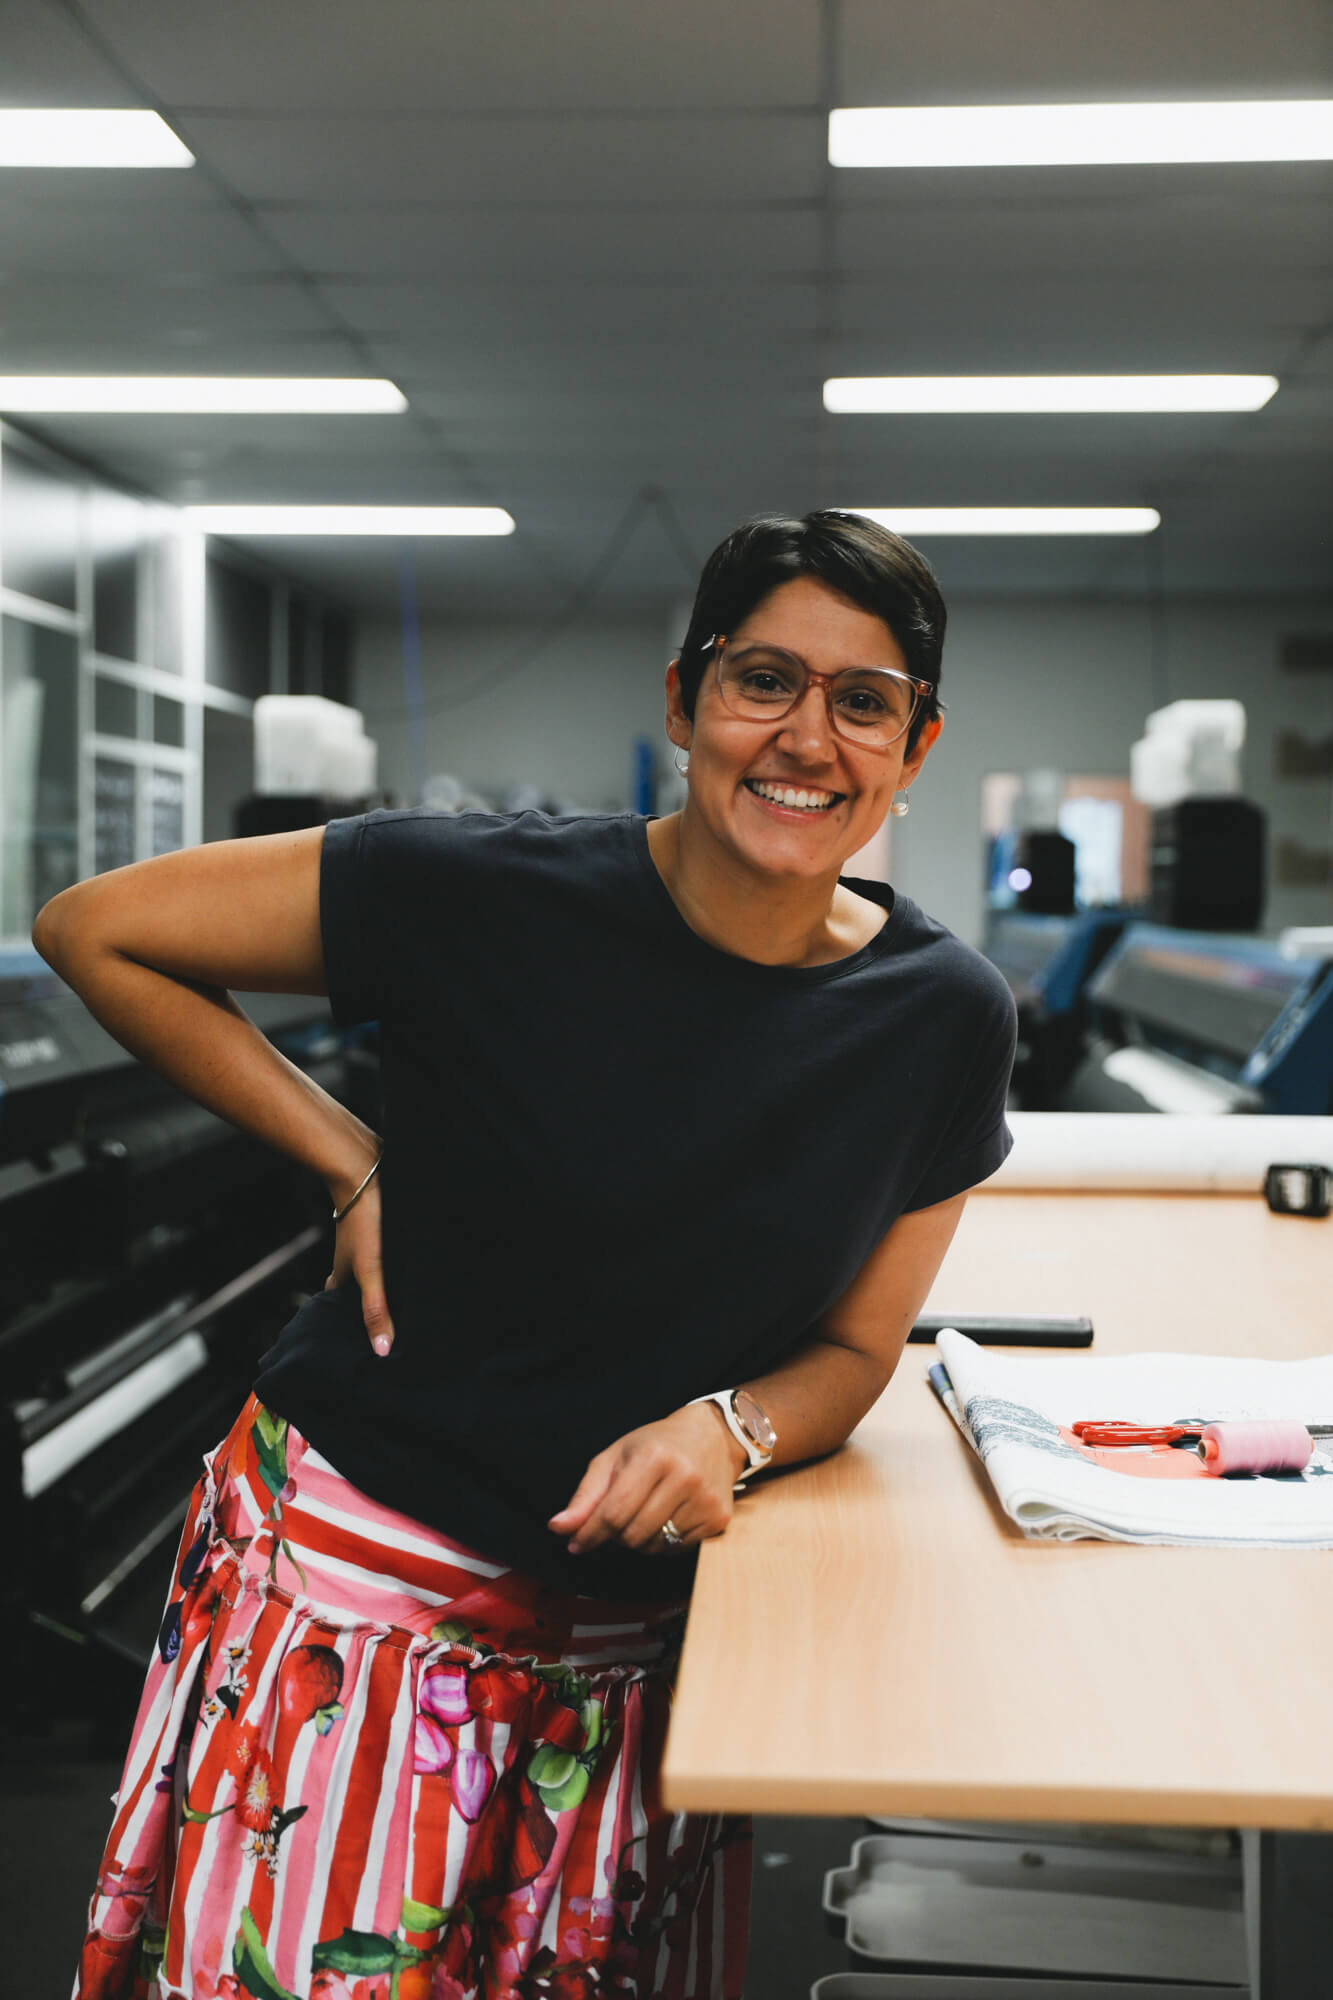 Rameez in the APPLiK printing studio. She wears a skirt made from fabric digitally printed at APPLiK.